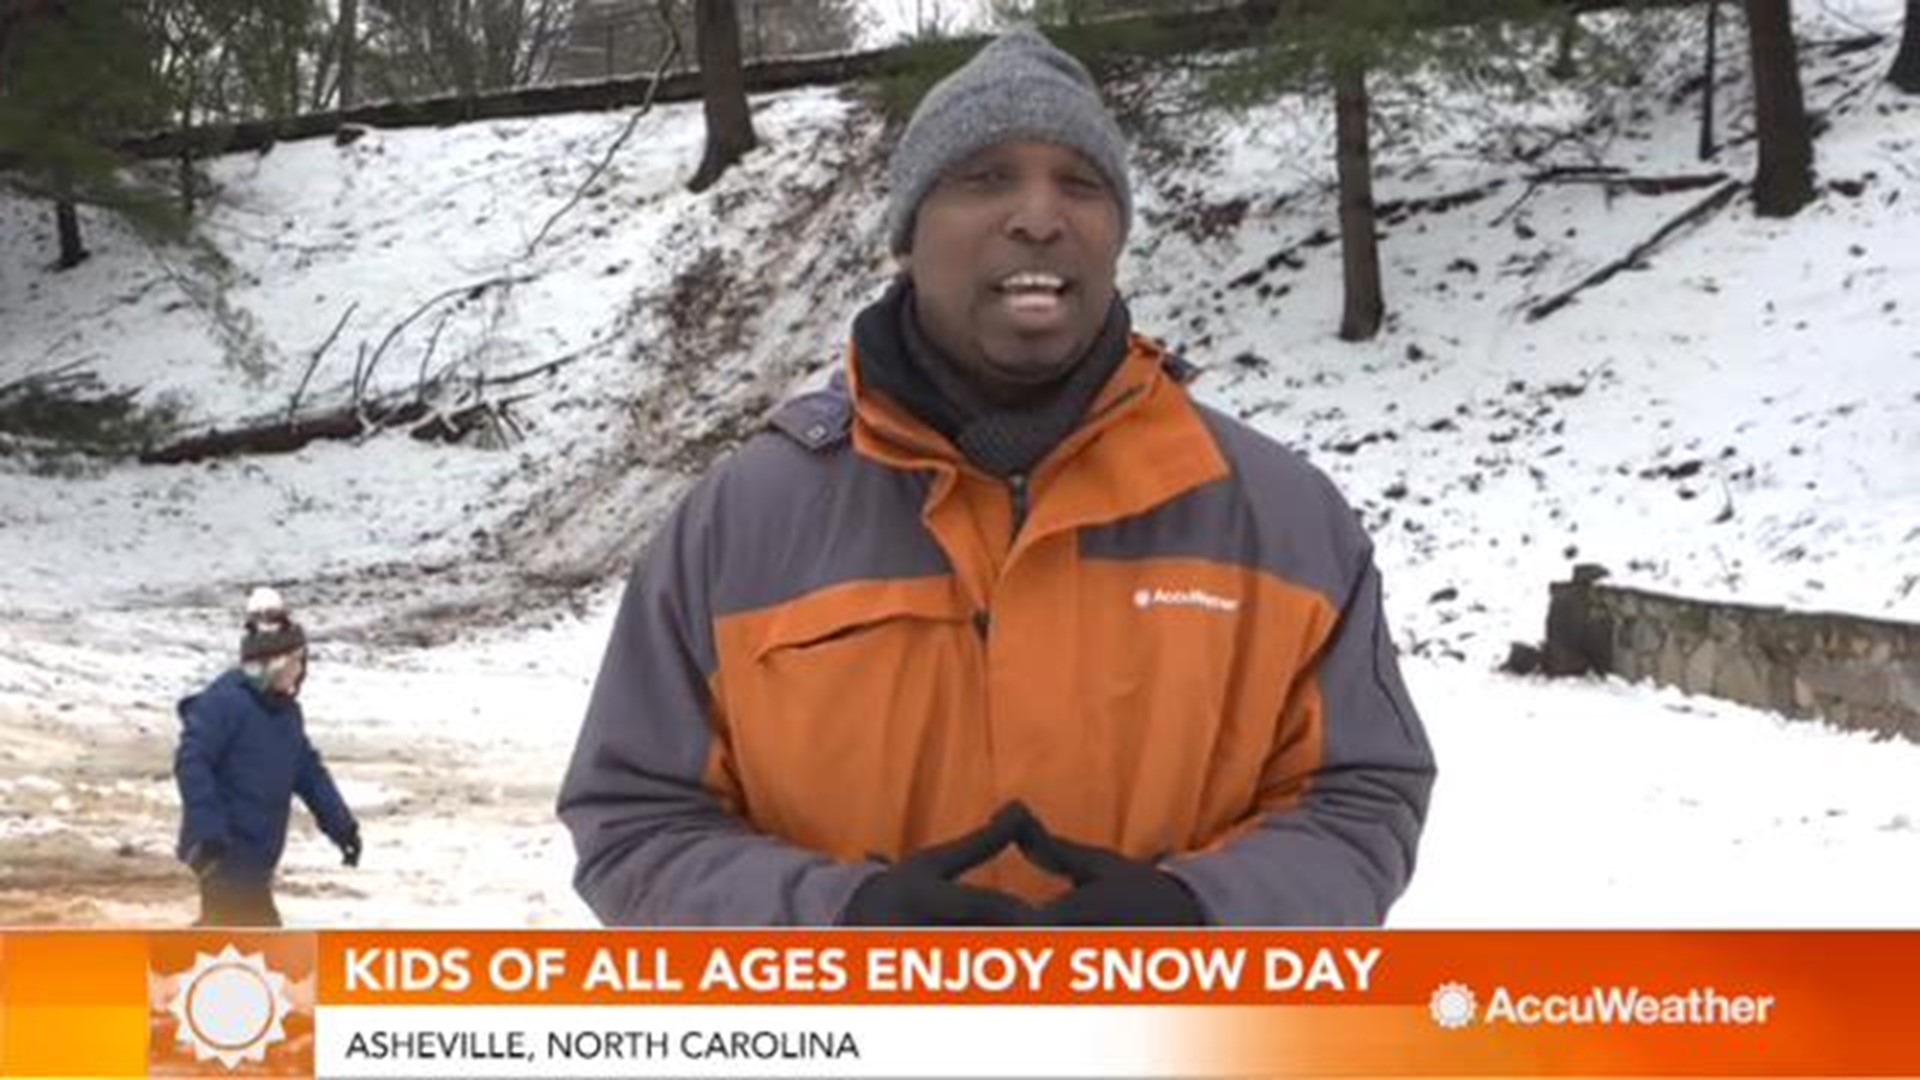 Thanks to a snowstorm, it's a snow day in Asheville, North Carolina. There is nothing better to do on a snowday than enjoy some sledding. Dexter Henry has the story.